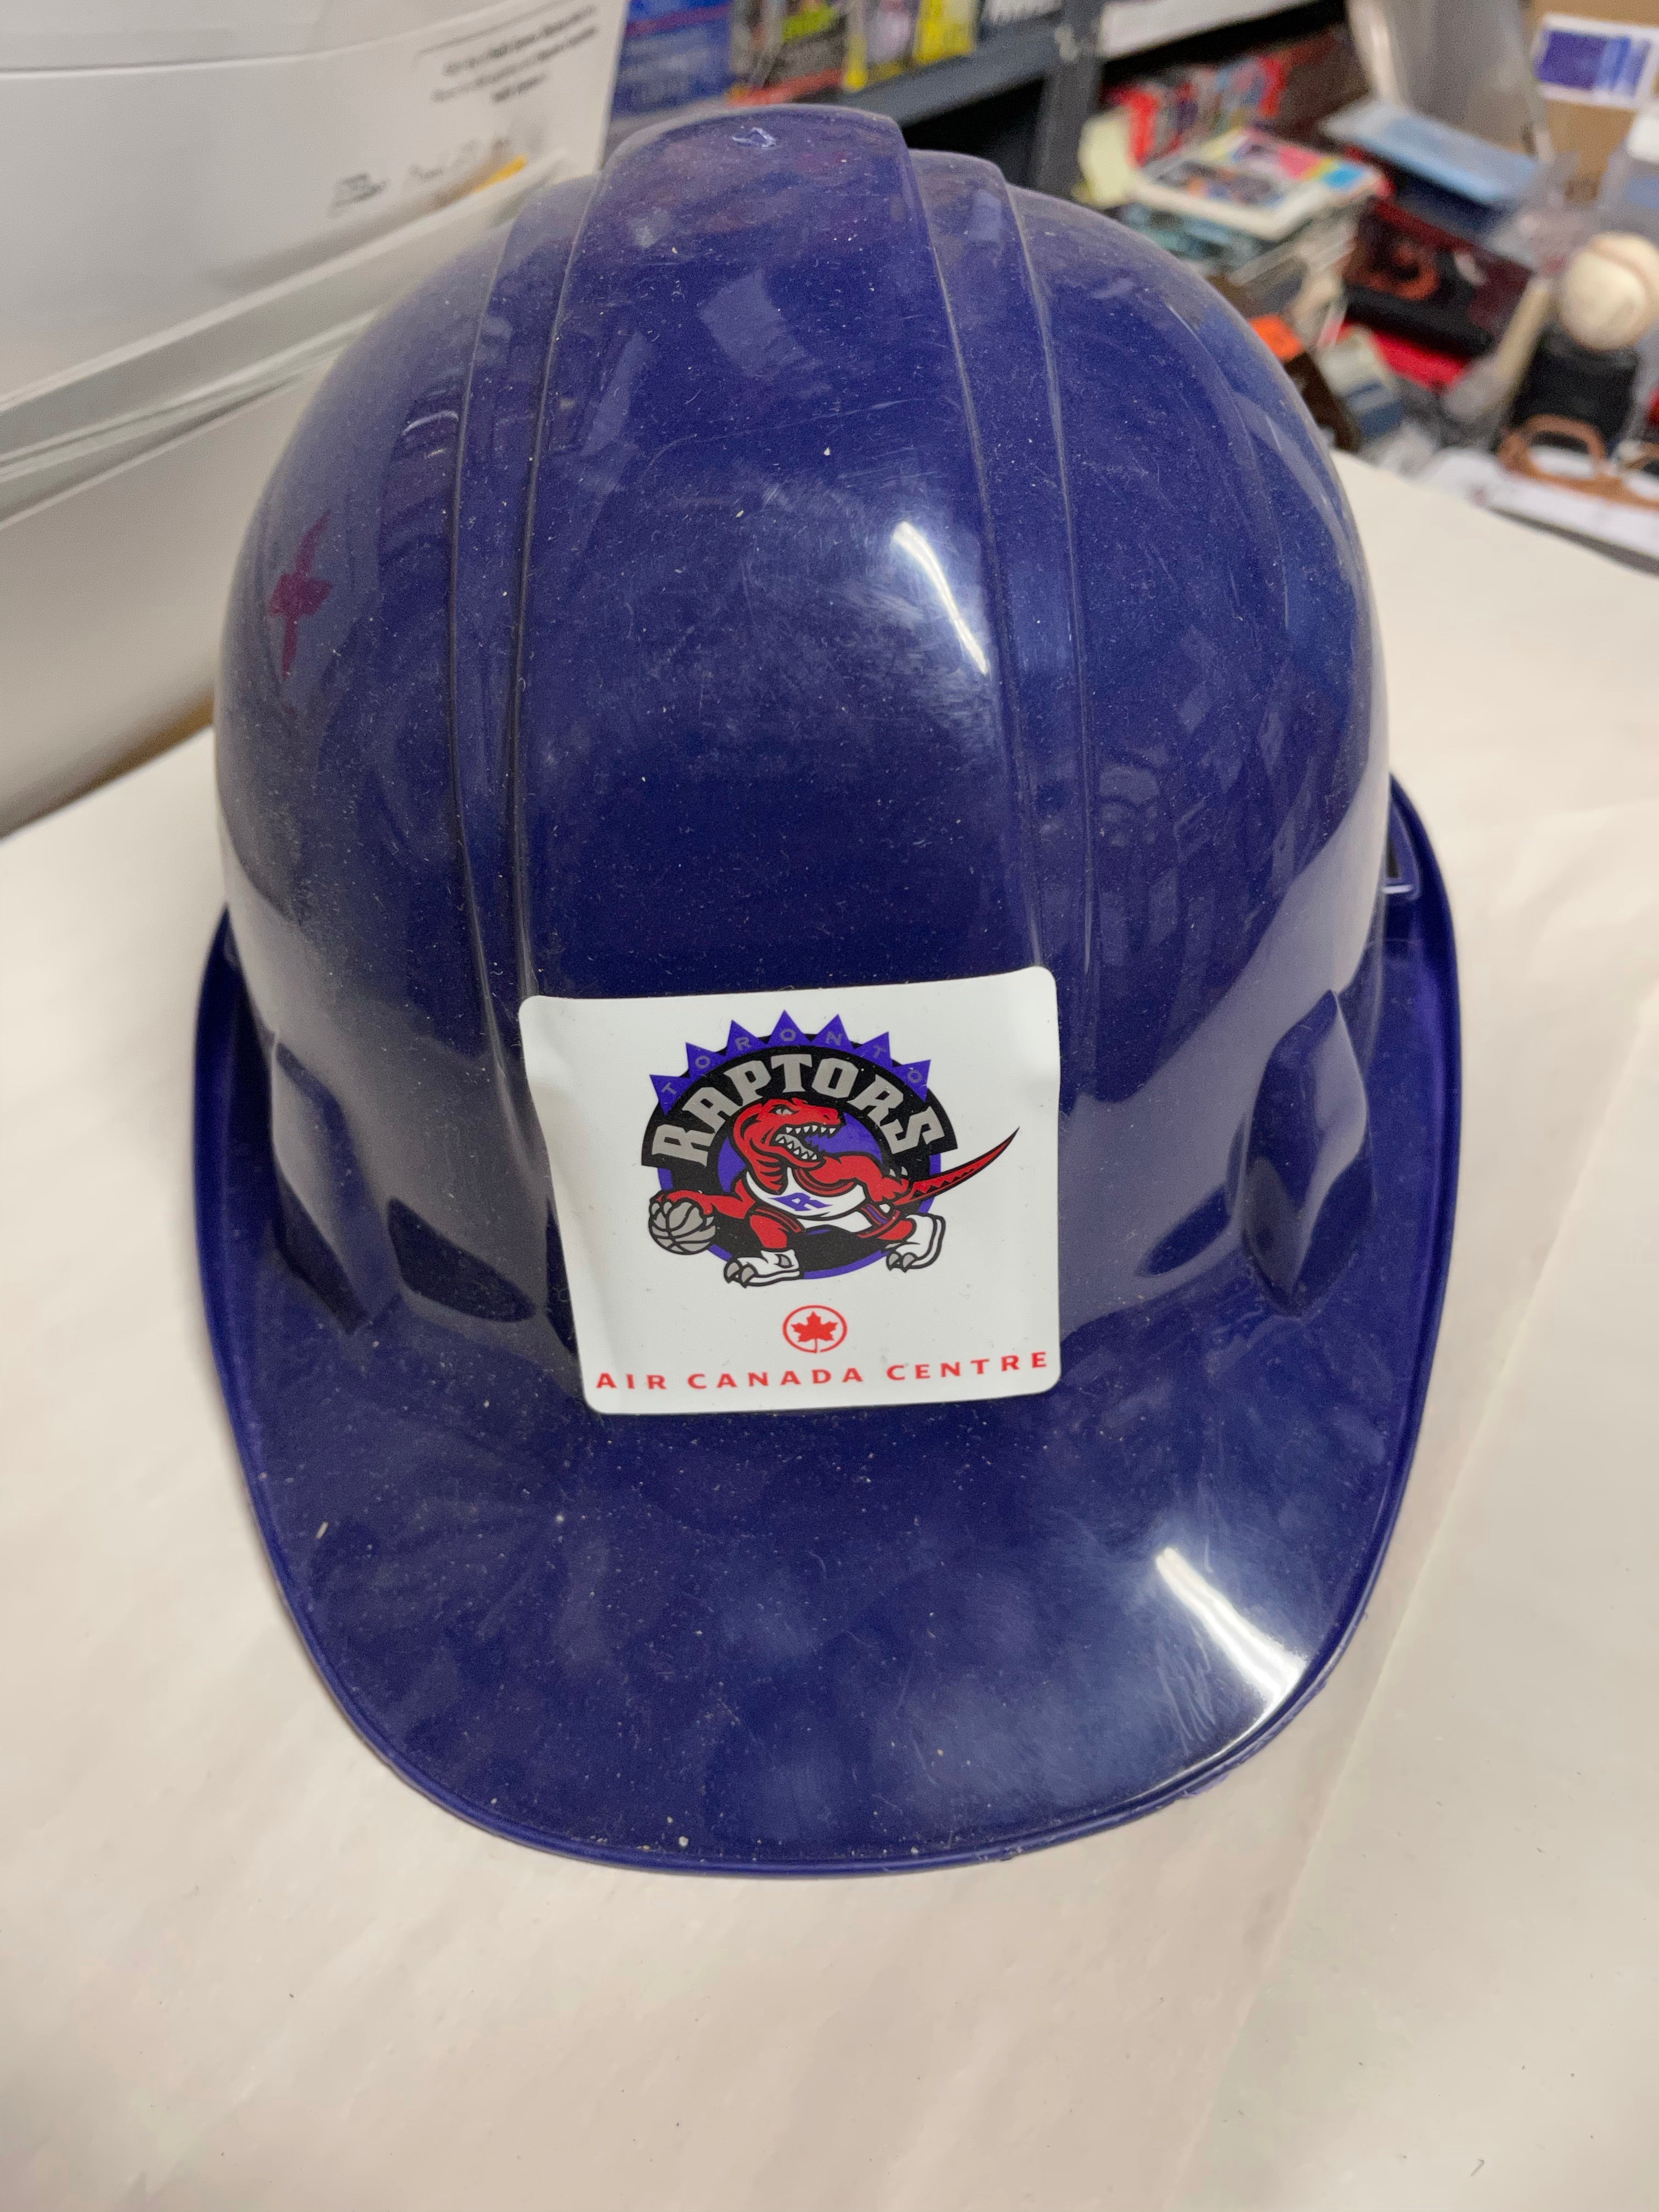 Toronto Raptors basketball hard hat from first year 1995